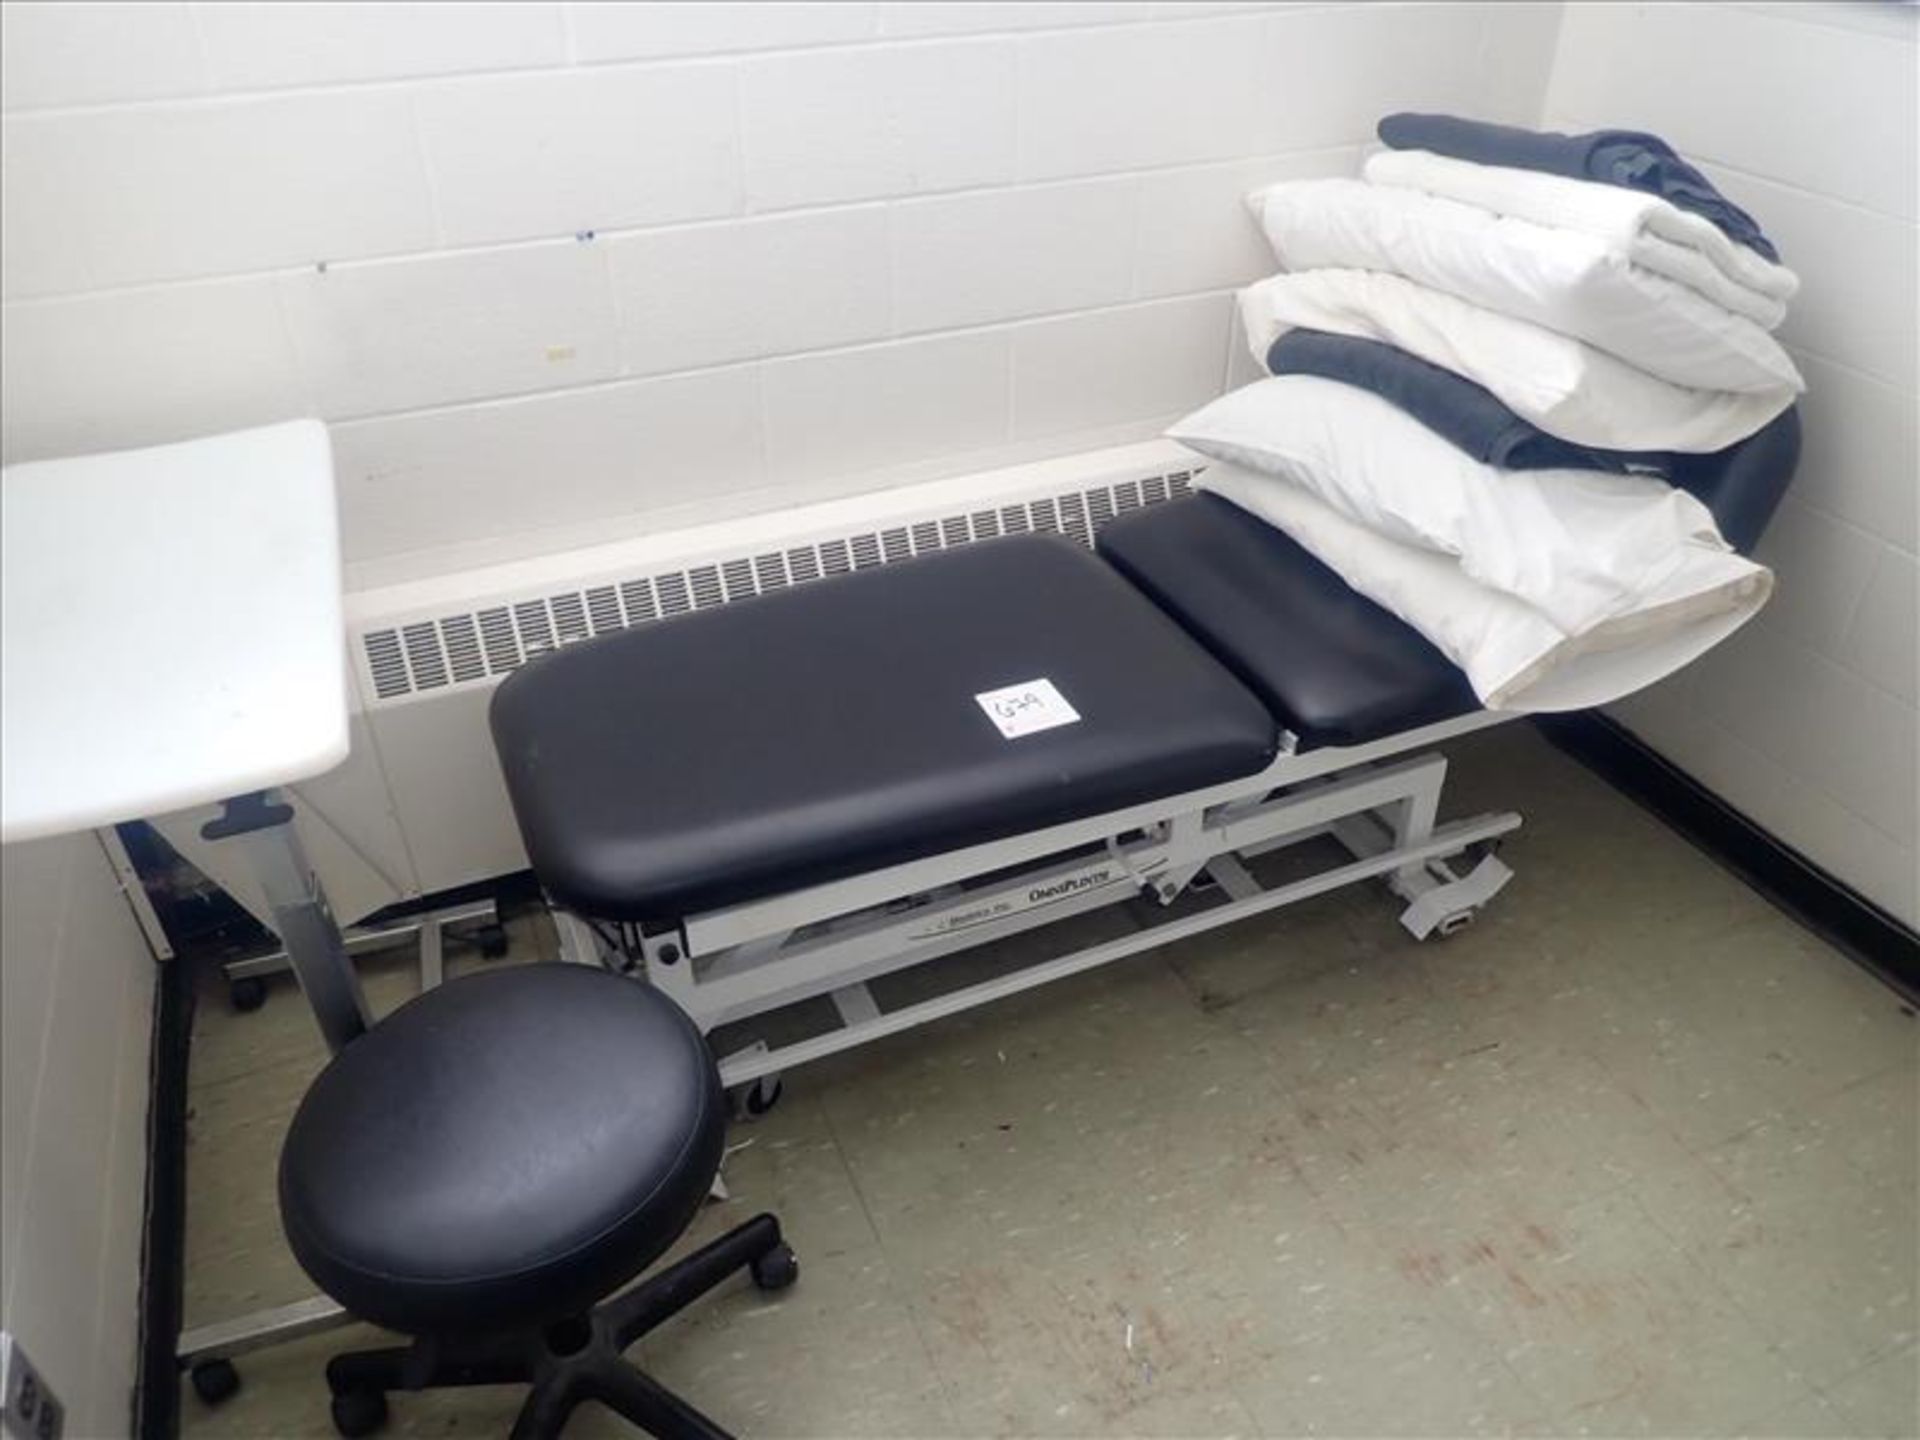 Medelco OmniPlinth patient bed c/w stool, table and bedding - Image 2 of 2